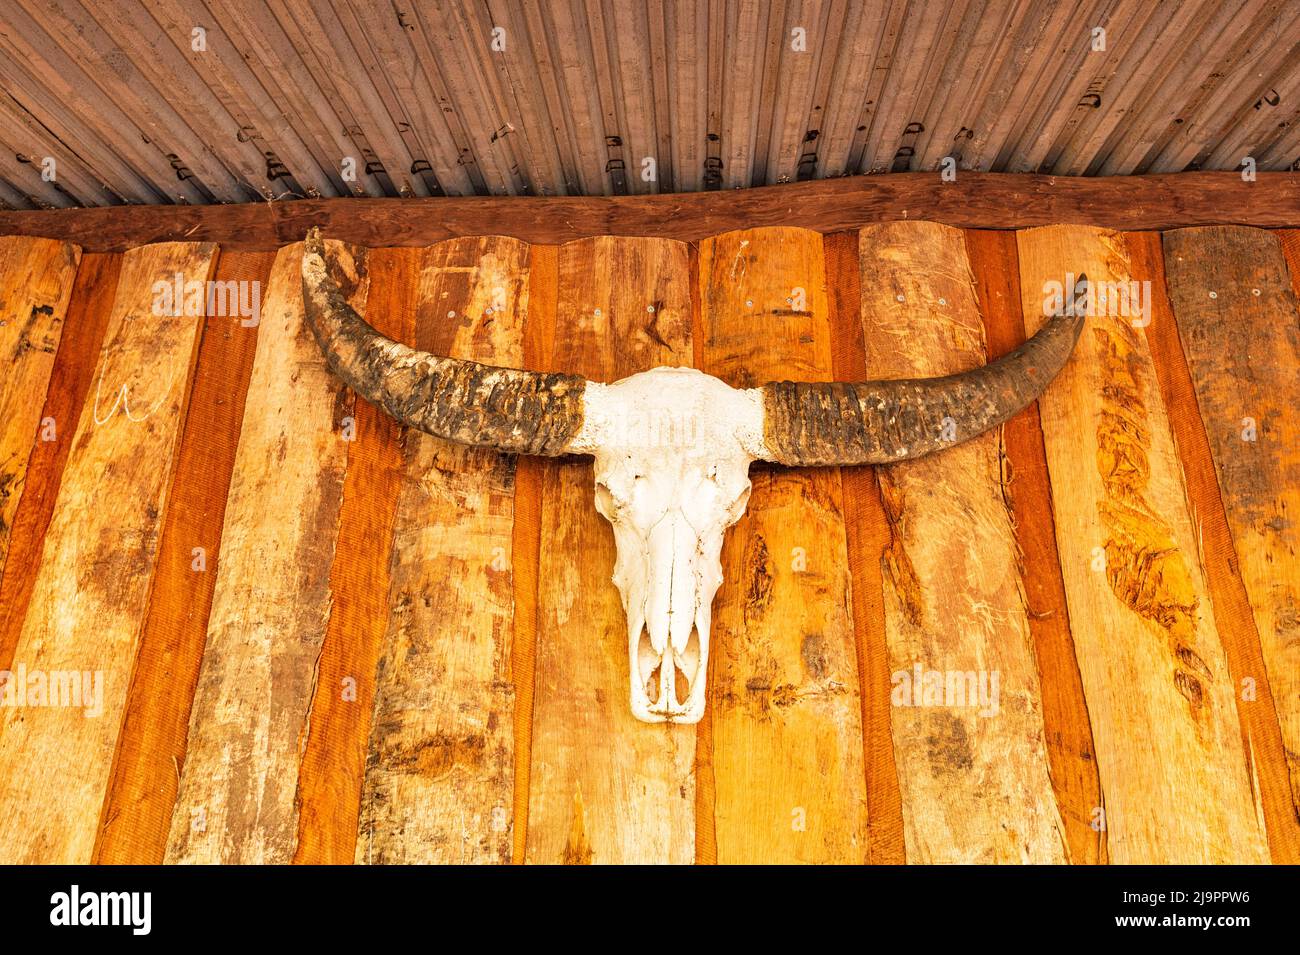 Buffalo skull and horns displayed at the popular Outback Bark Hut Inn, Northern Territory, NT, Australia Stock Photo